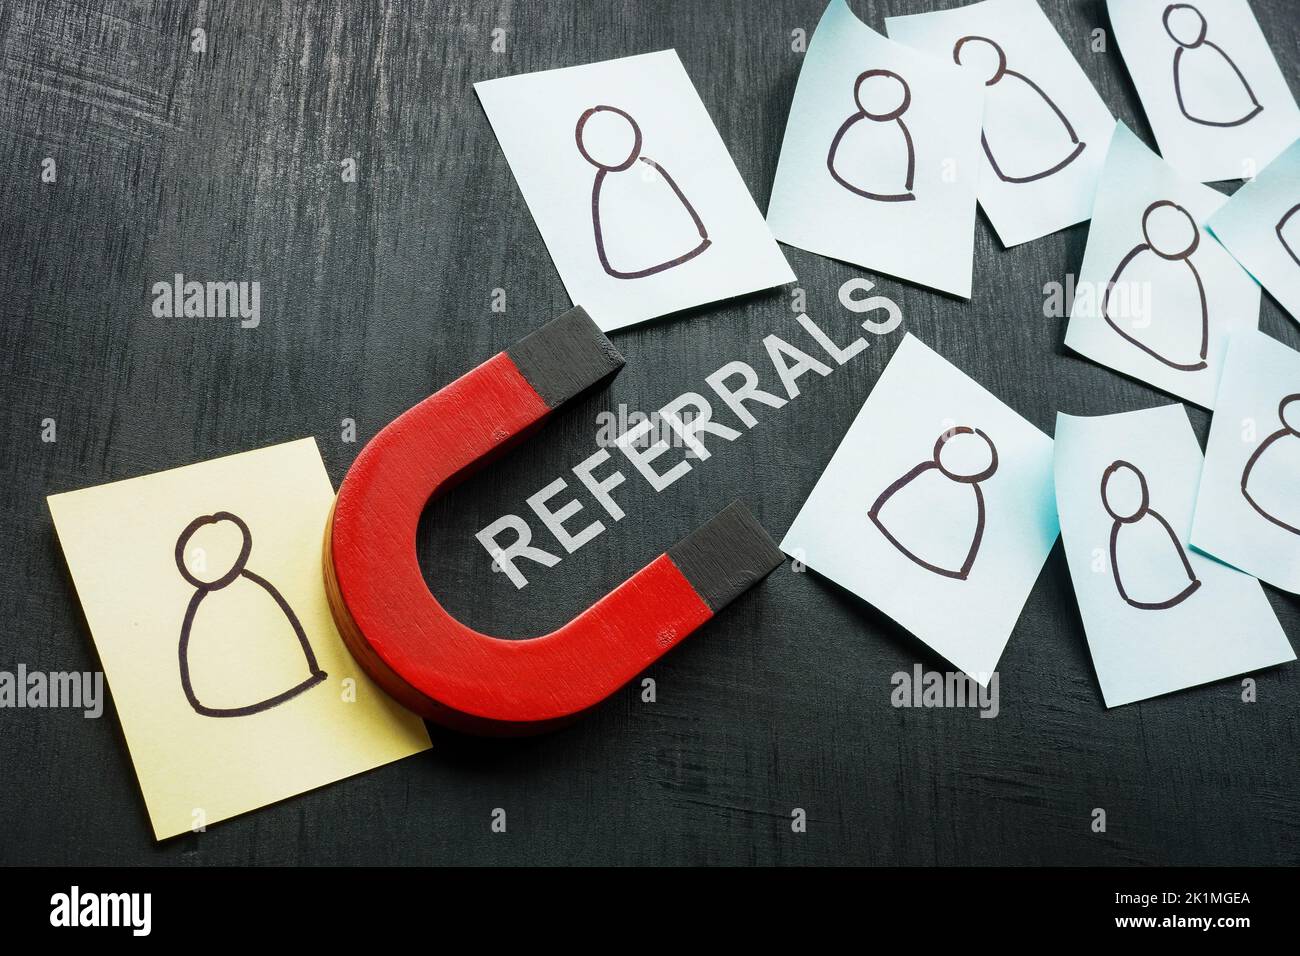 Referrals concept. Magnet and stickers with figures. Stock Photo